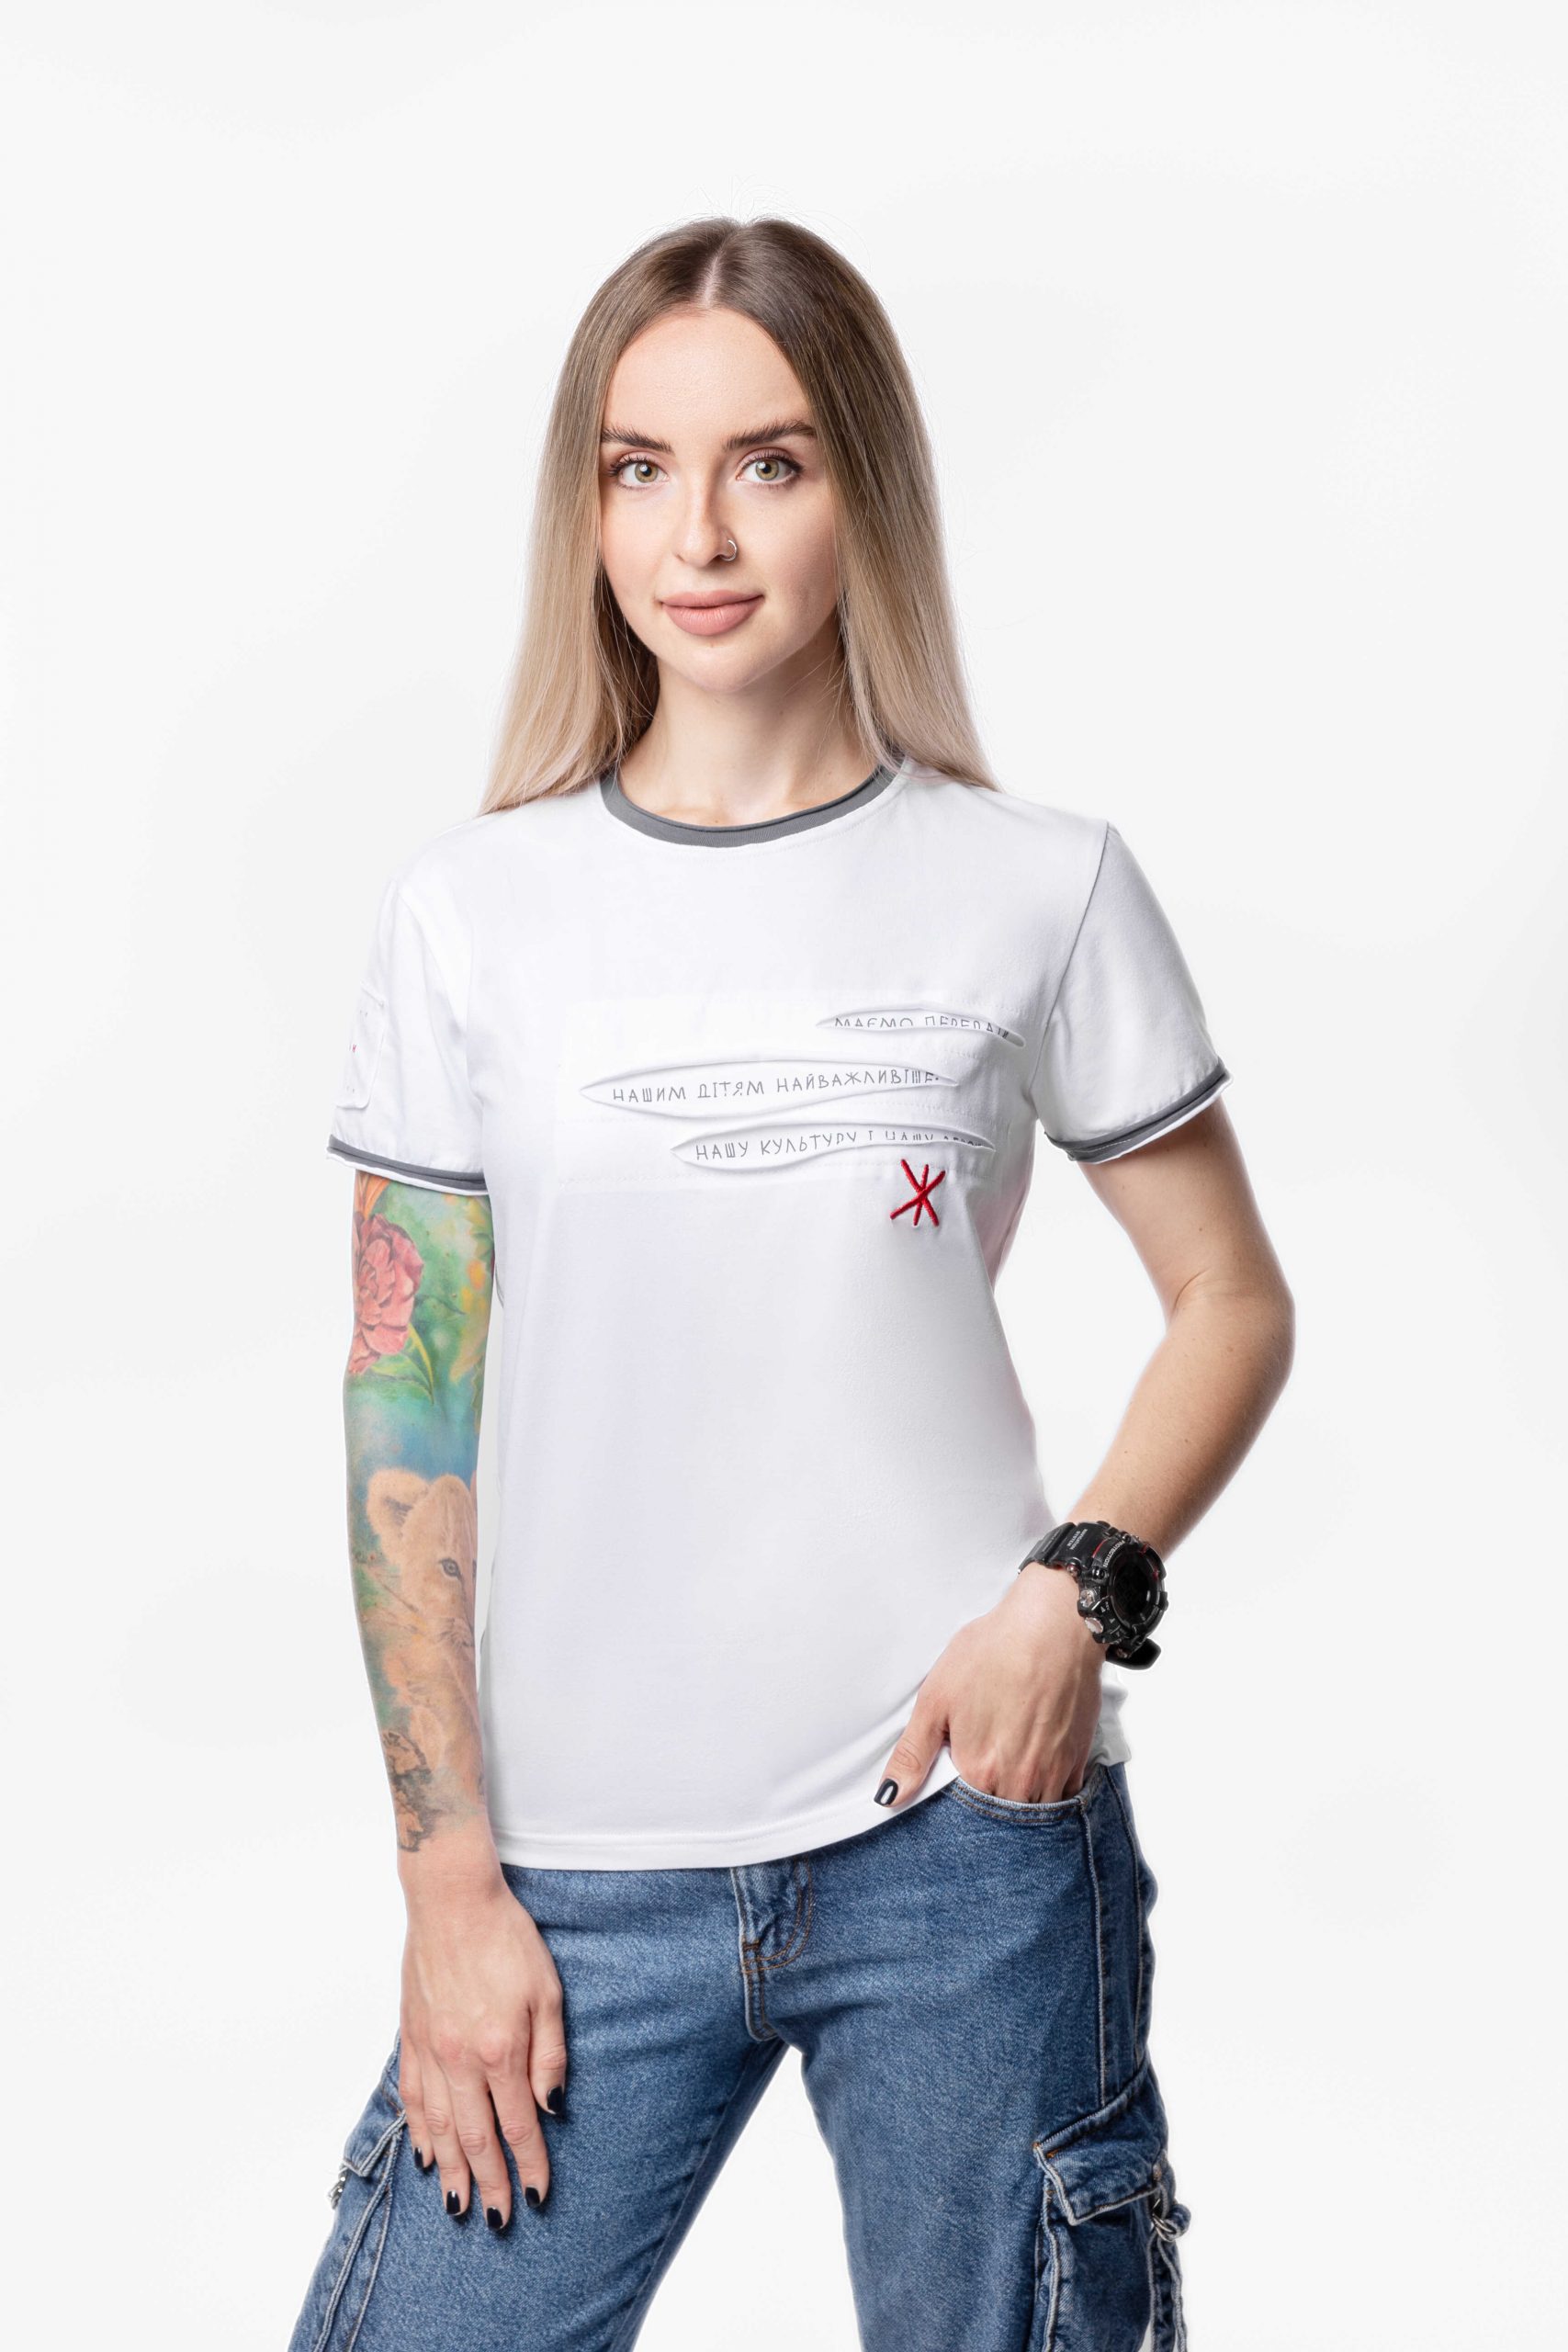 Women's T-Shirt Culture And Weapons. Color white. .